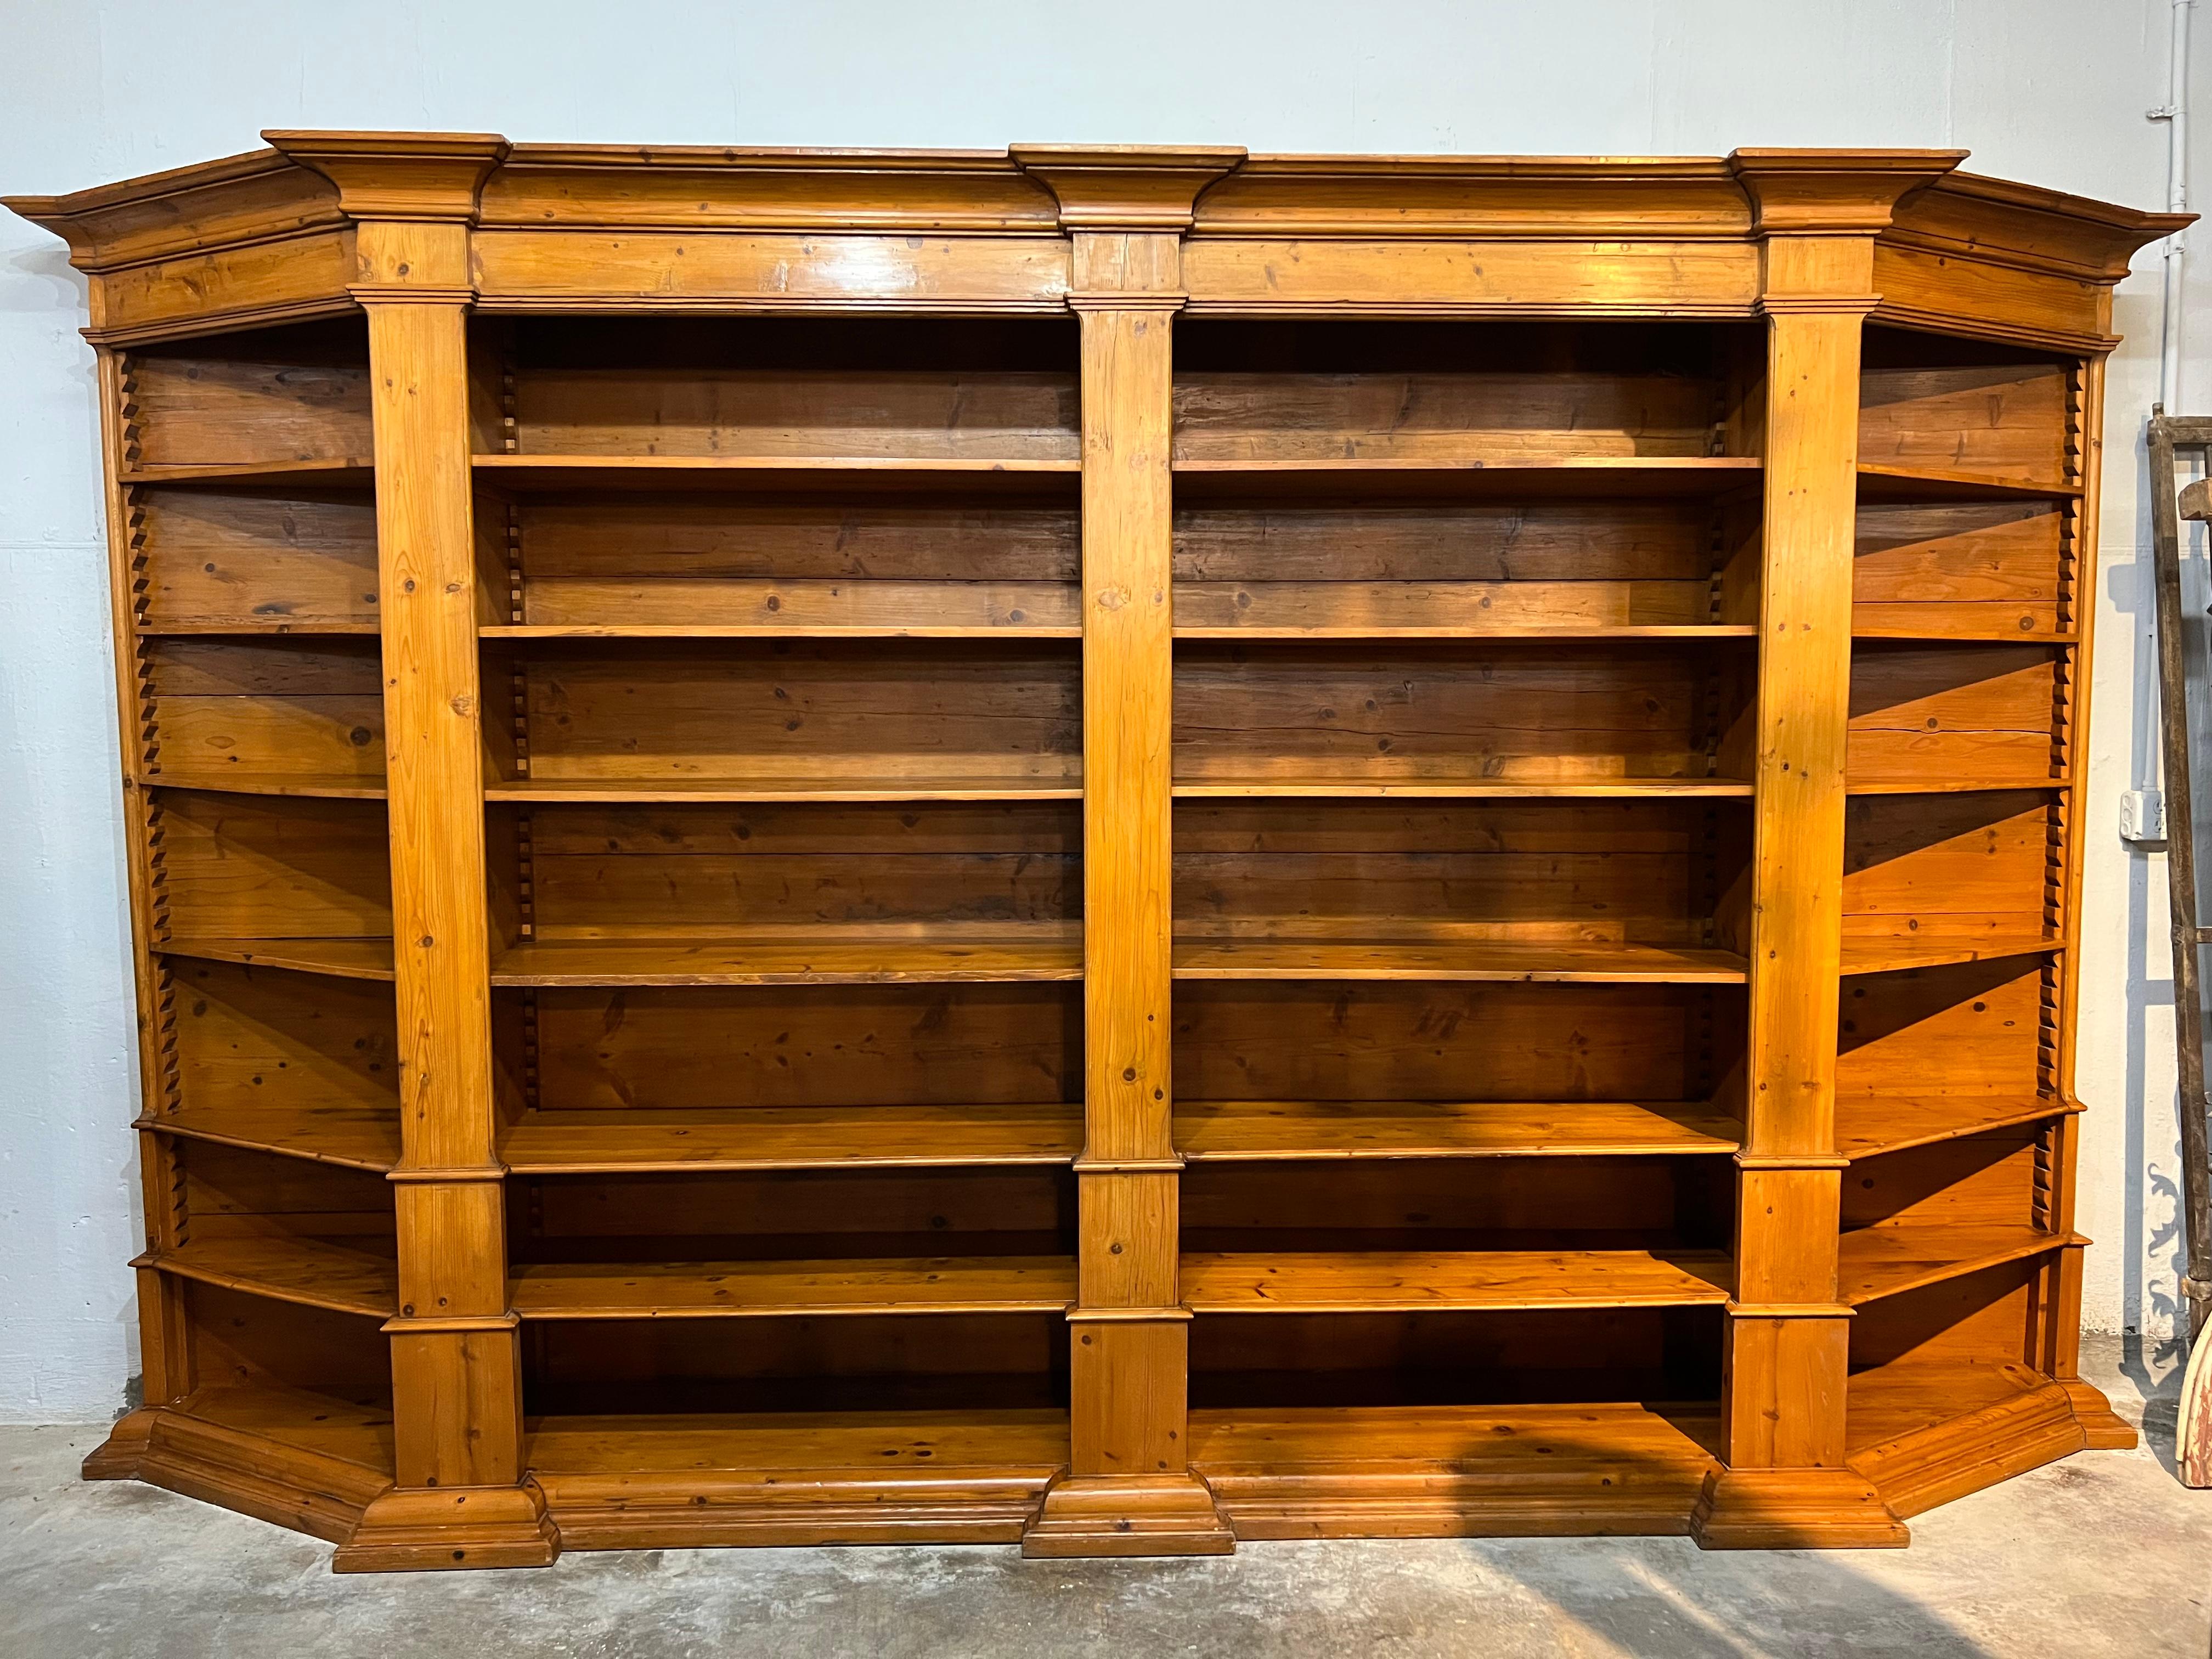 A very handsome, late 19th - early 20th century Bibliotheque - Bookcase from the Veneto region of Italy. Soundly constructed from richly stained pine. A wonderful display piece for not only books, but for art as well.